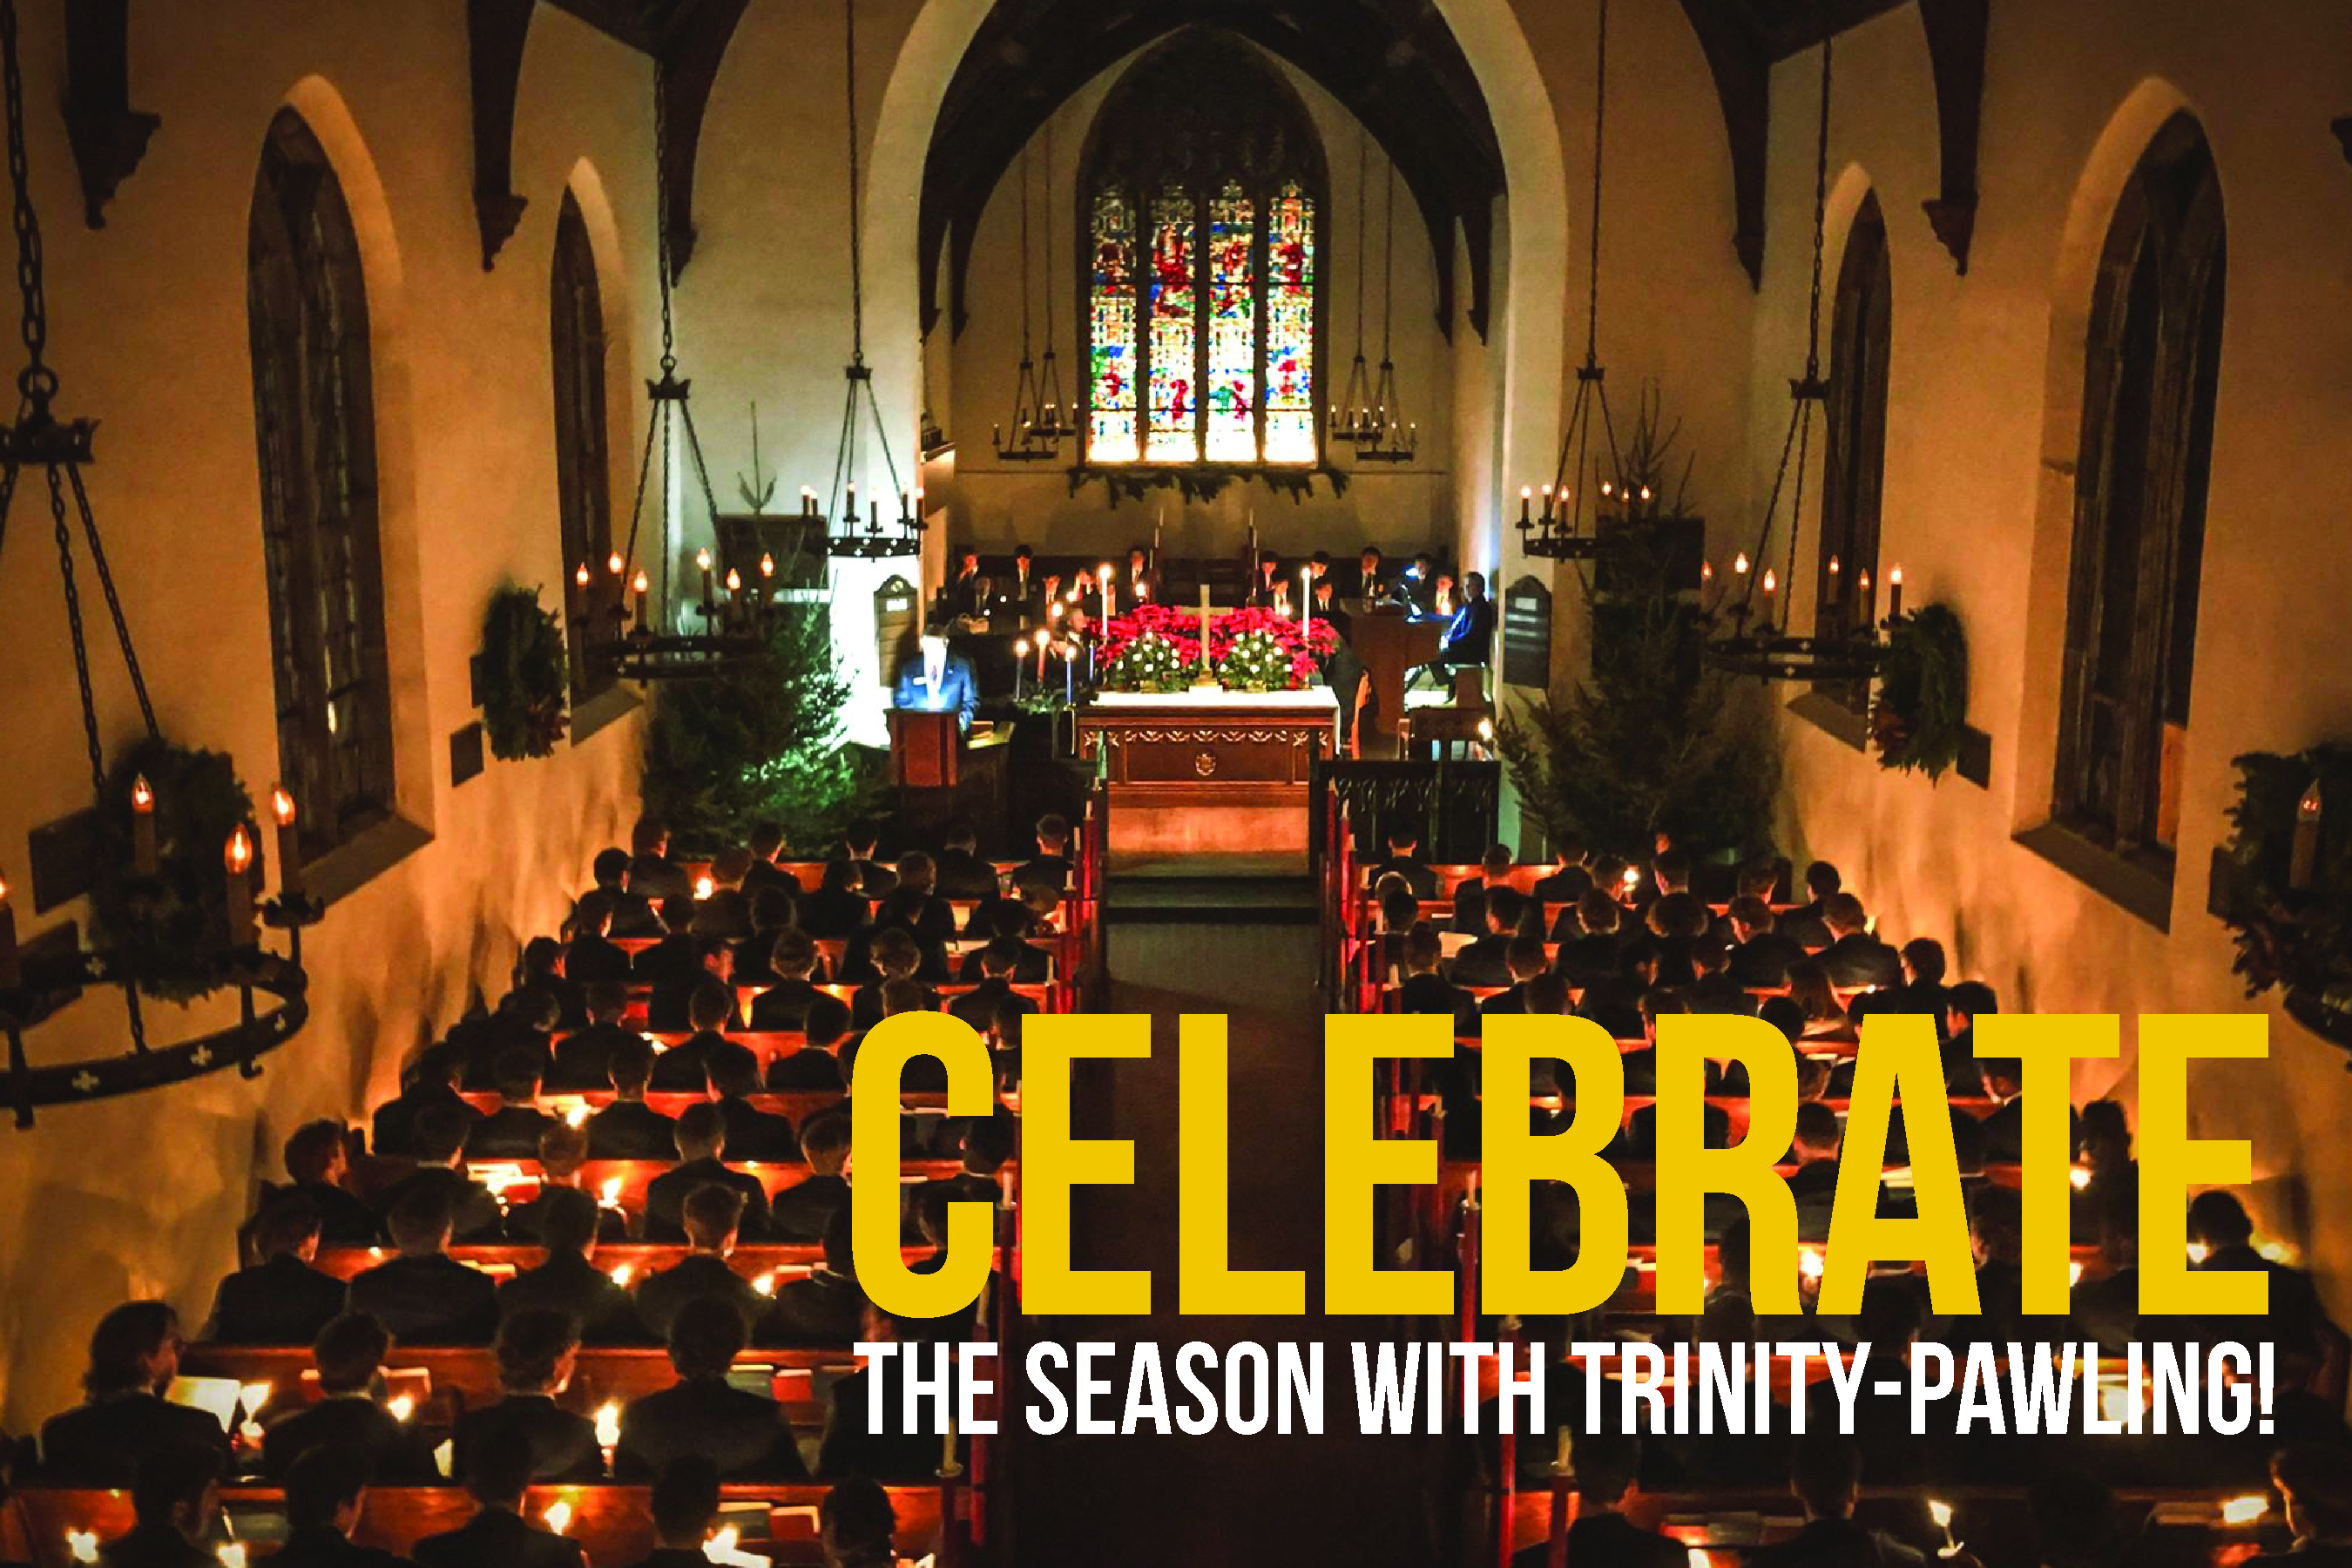 Trinity-Pawling Holiday Events